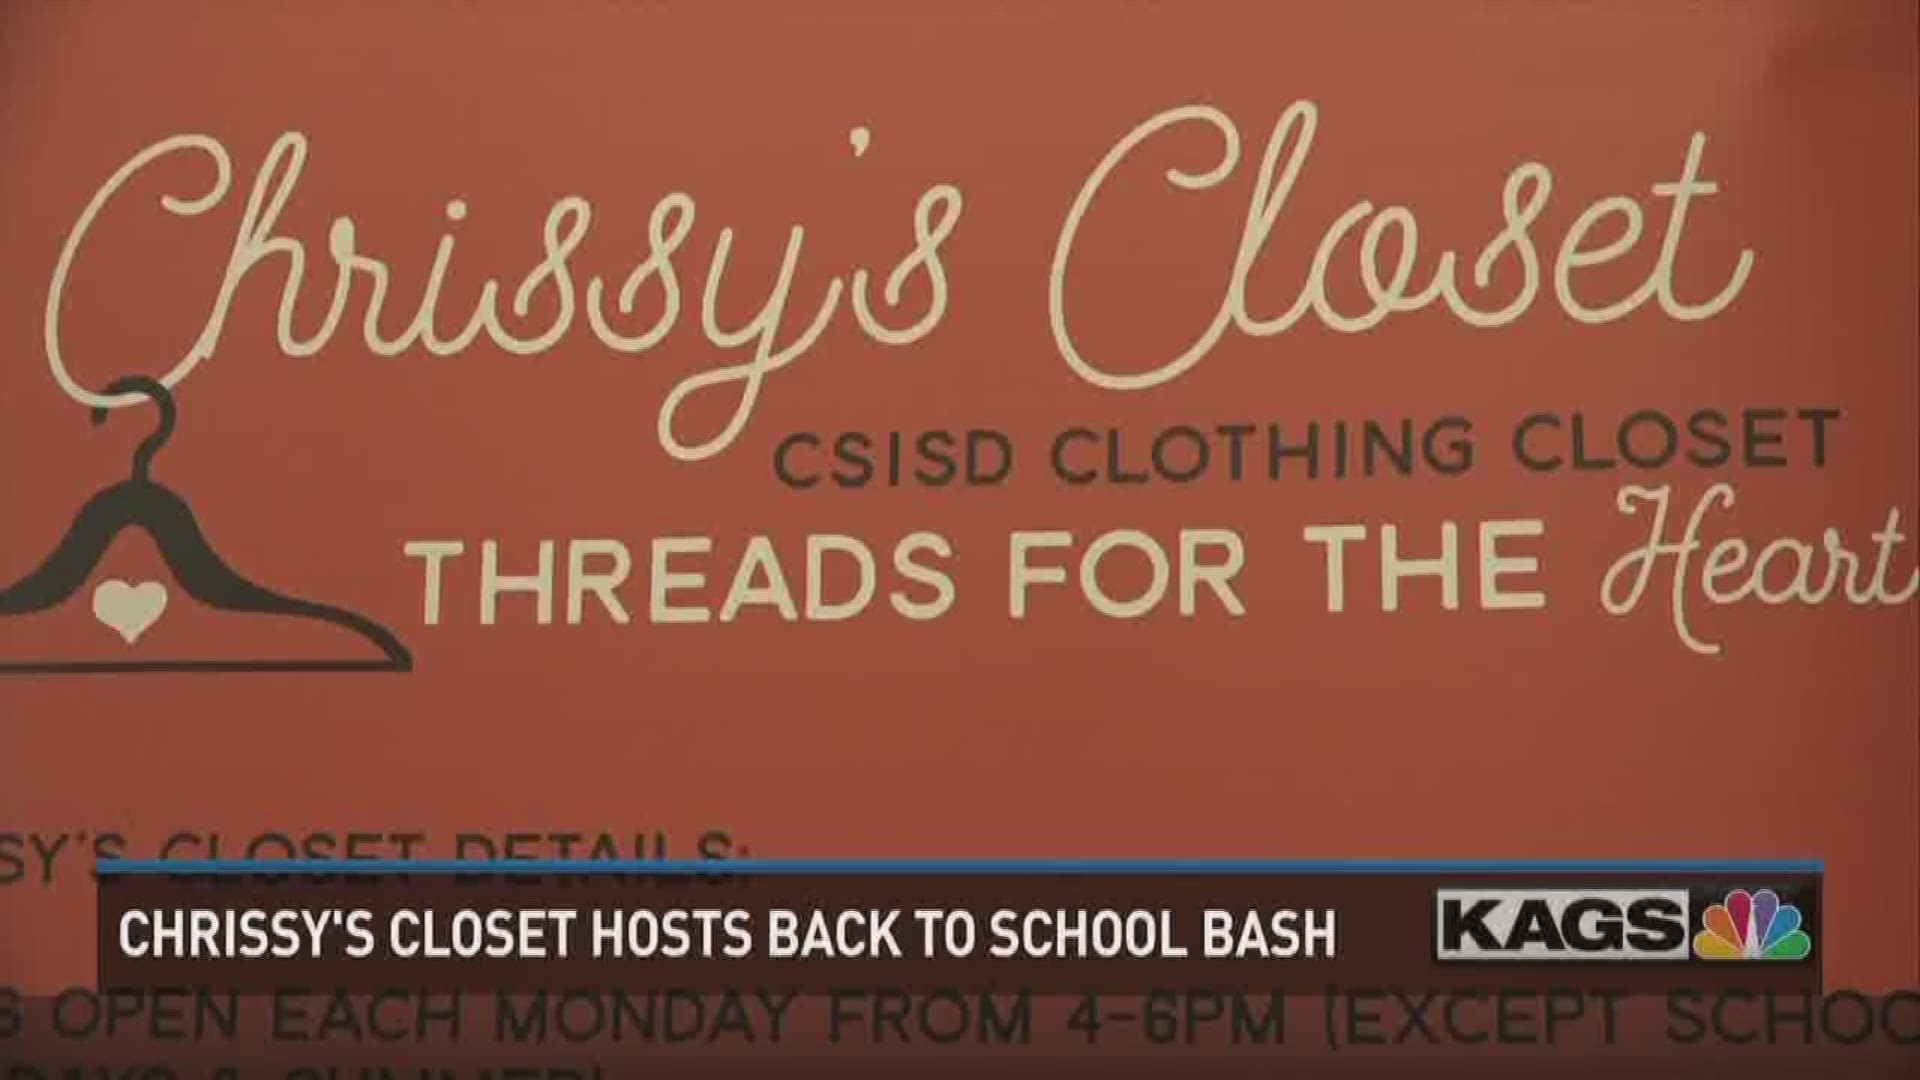 College Station's Chrissy's Closet is ready to help students in need  with clothing, shoes and other basic items.